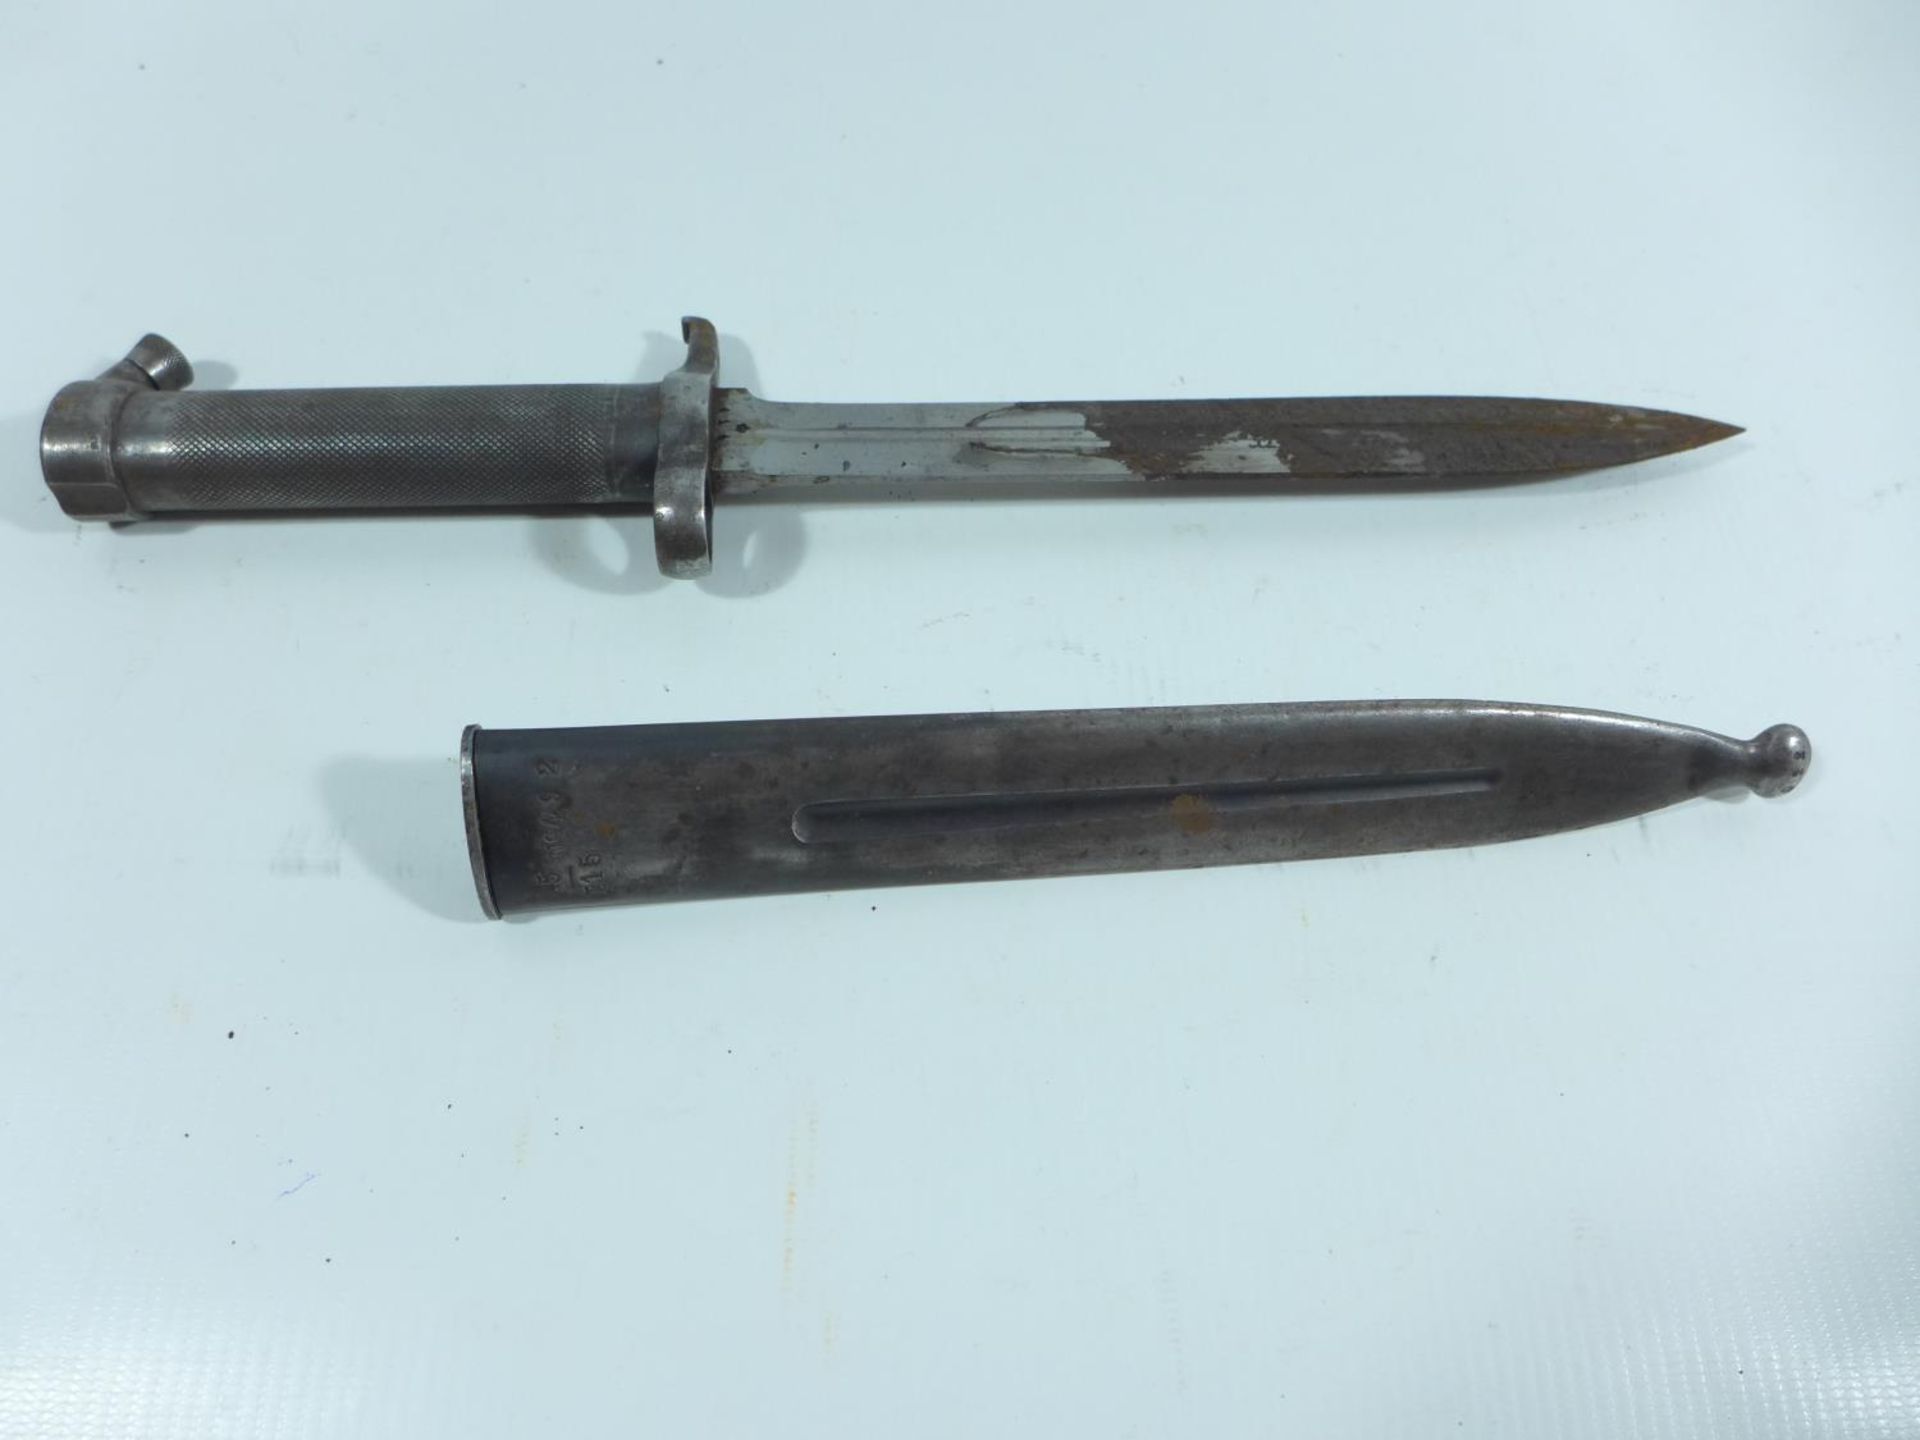 A SWEDISH 1896 PATTERN BAYONET AND SCABBARD, 21CM BLADE, LENGTH 35.5CM - Image 2 of 6